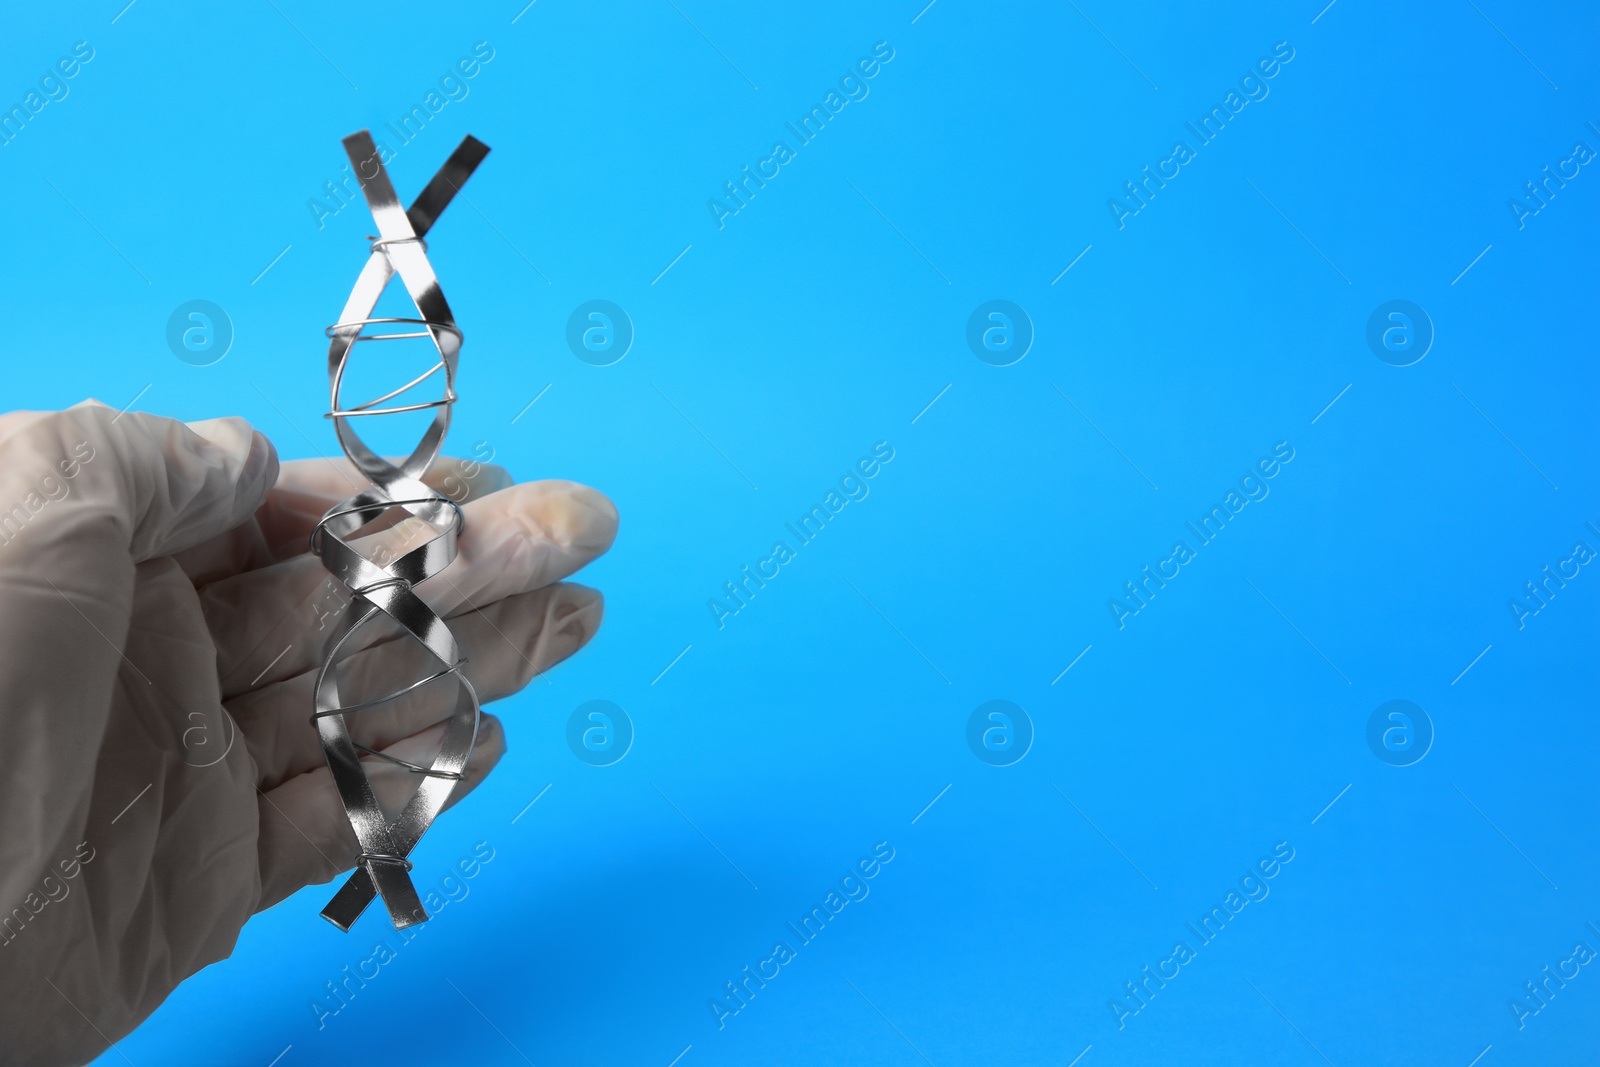 Photo of Scientist with DNA molecular chain model made of metal on blue background, closeup. Space for text